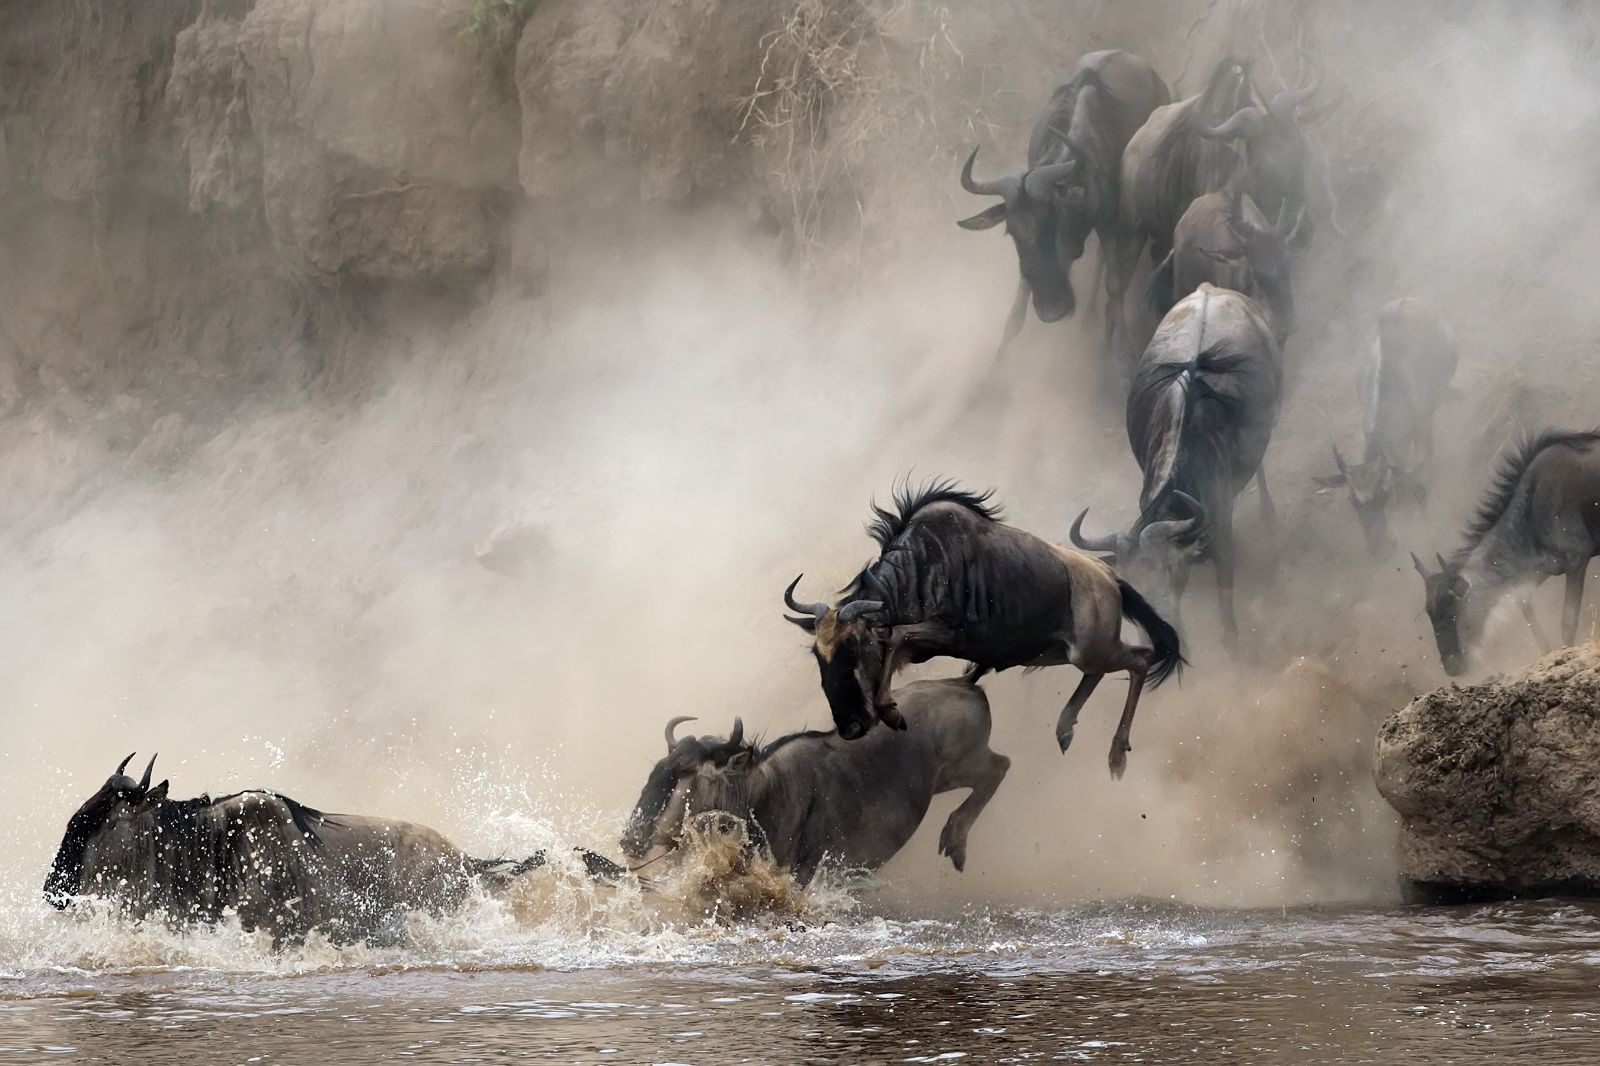 Wildebeest jumping into the waters during Kenya's great migration